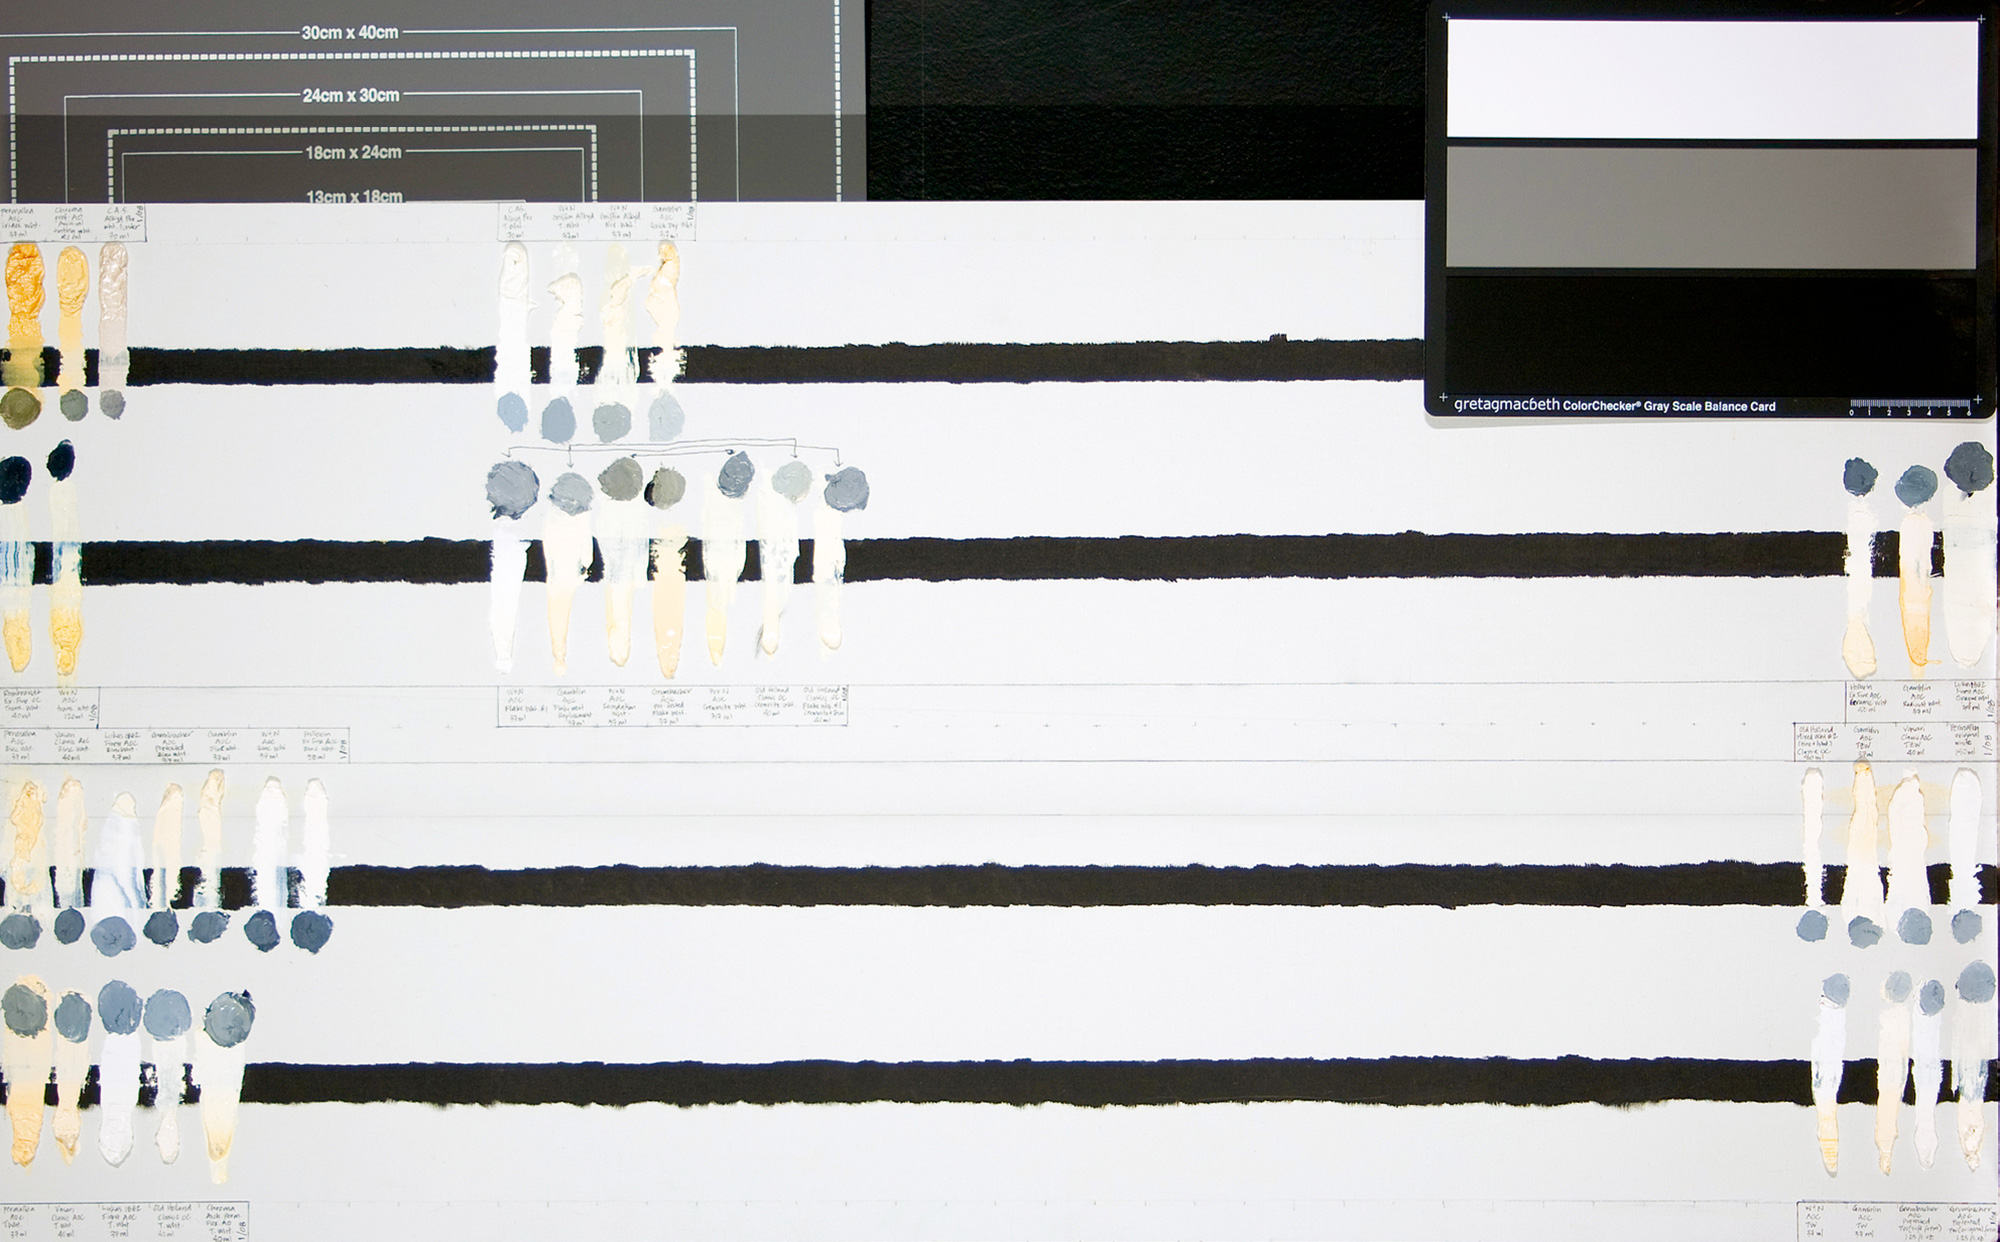 A photograph of a page of white paint swatches, from Jonathan Linton‘s research into how various white oil paints fade over time.